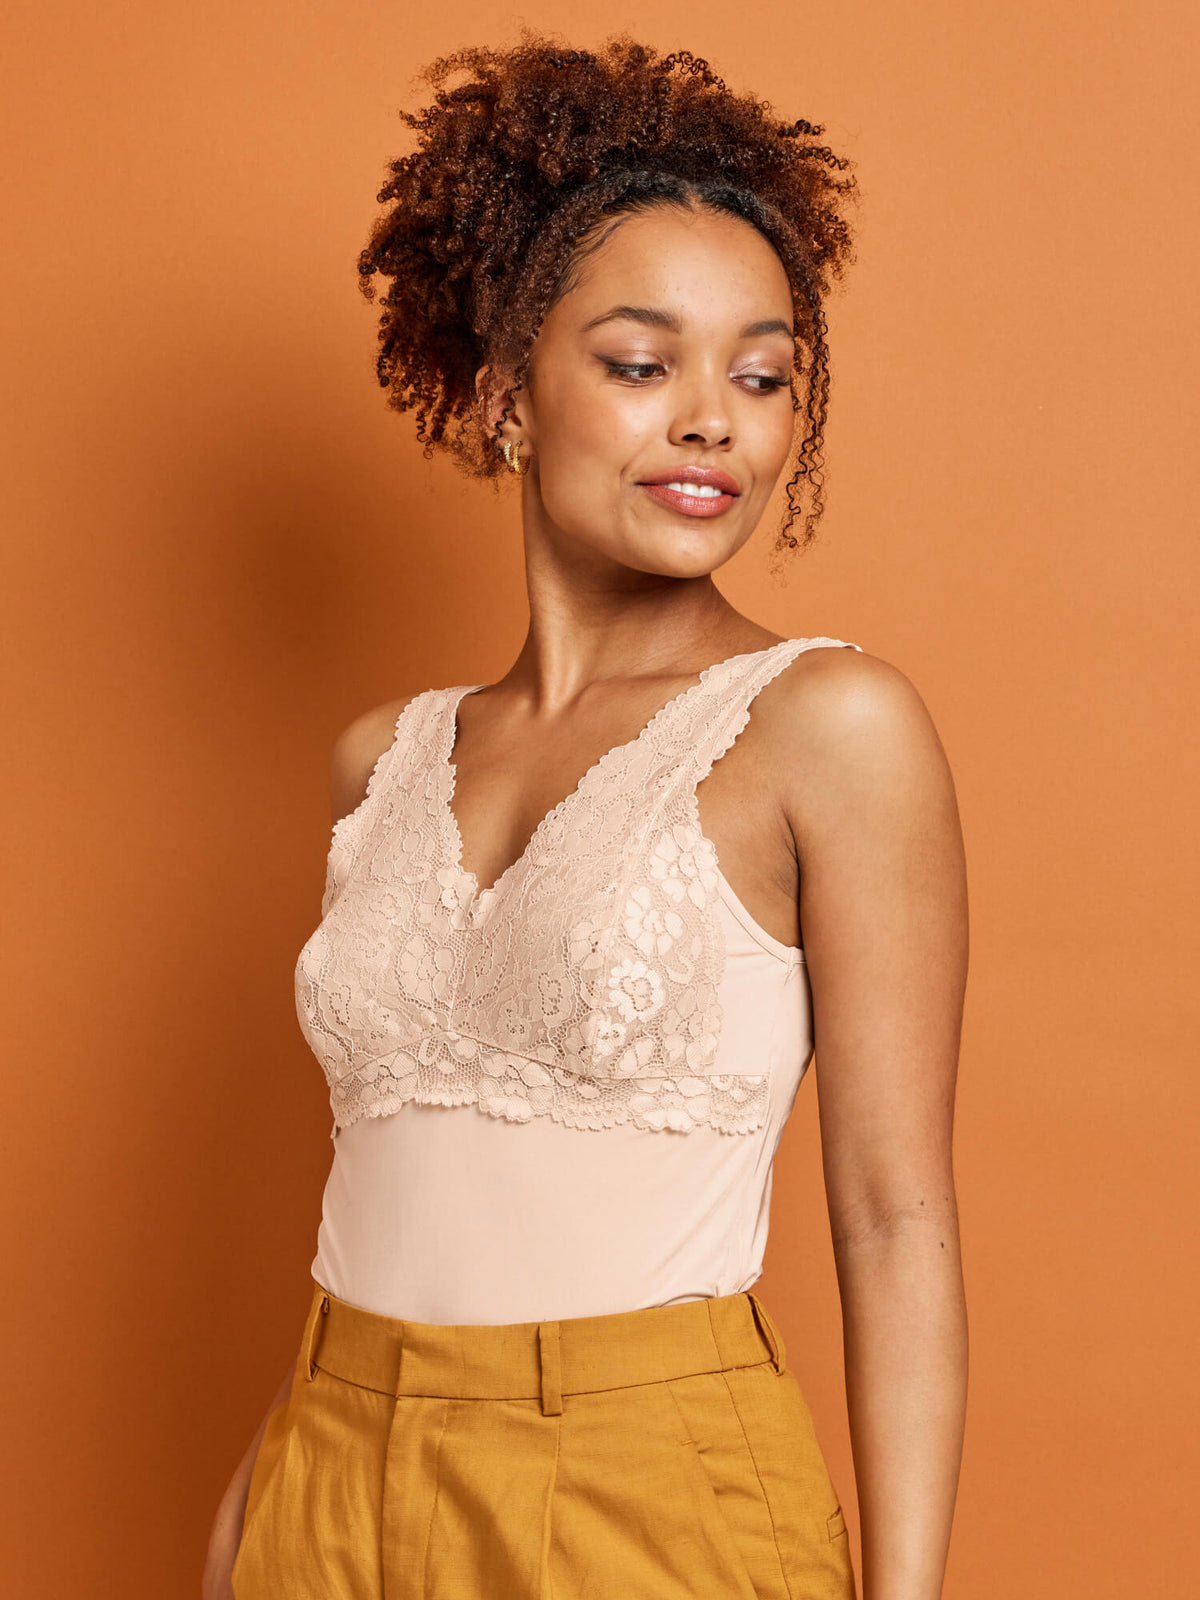 Helen Micro & Lace Camisole Top in Nude - Kayser Lingerie